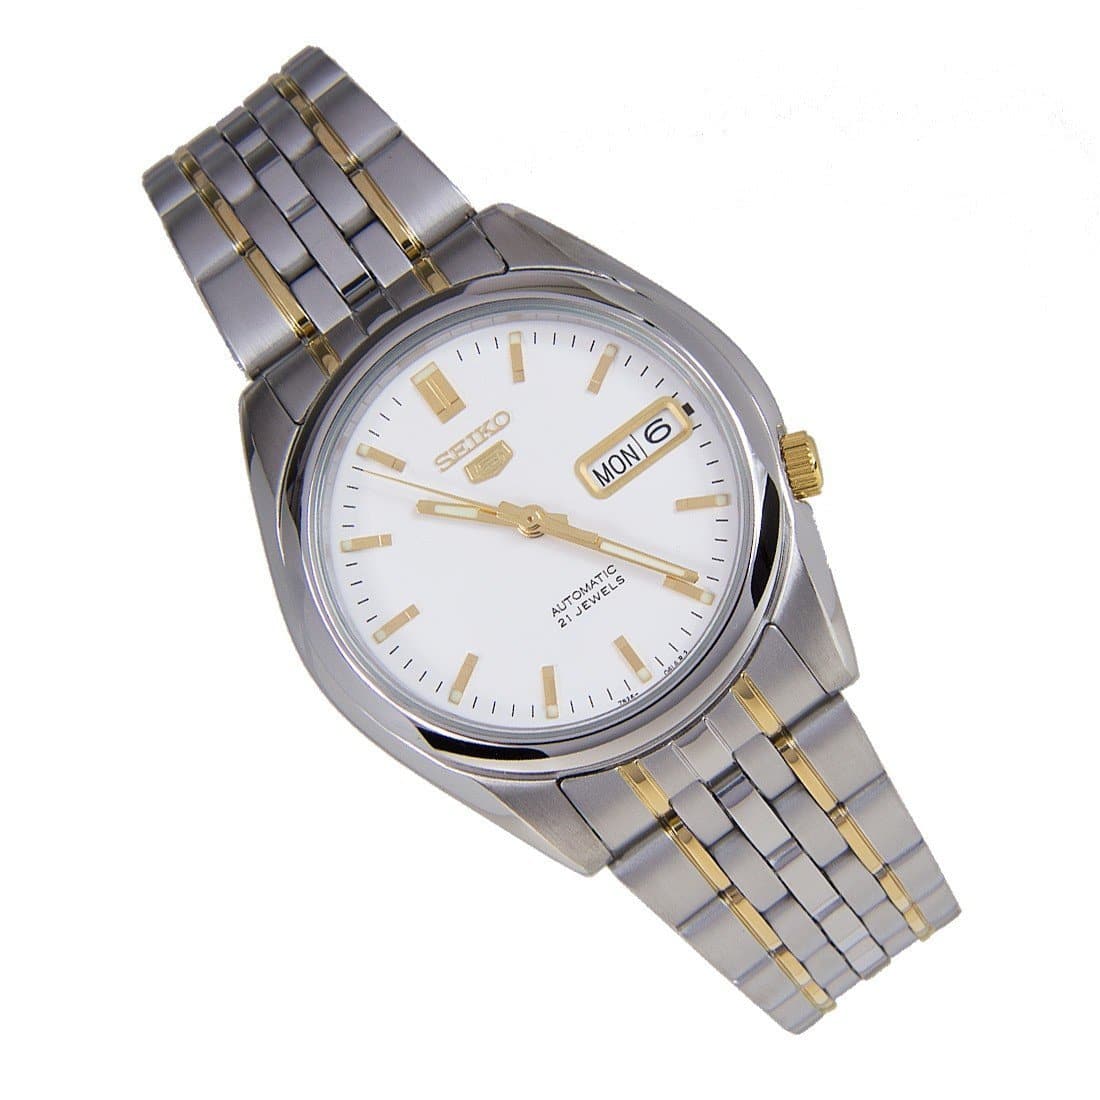 Seiko 5 Classic Mens Size White Dial 2 Tone Gold Plated Stainless Steel Strap Watch SNK363K1 - Diligence1International